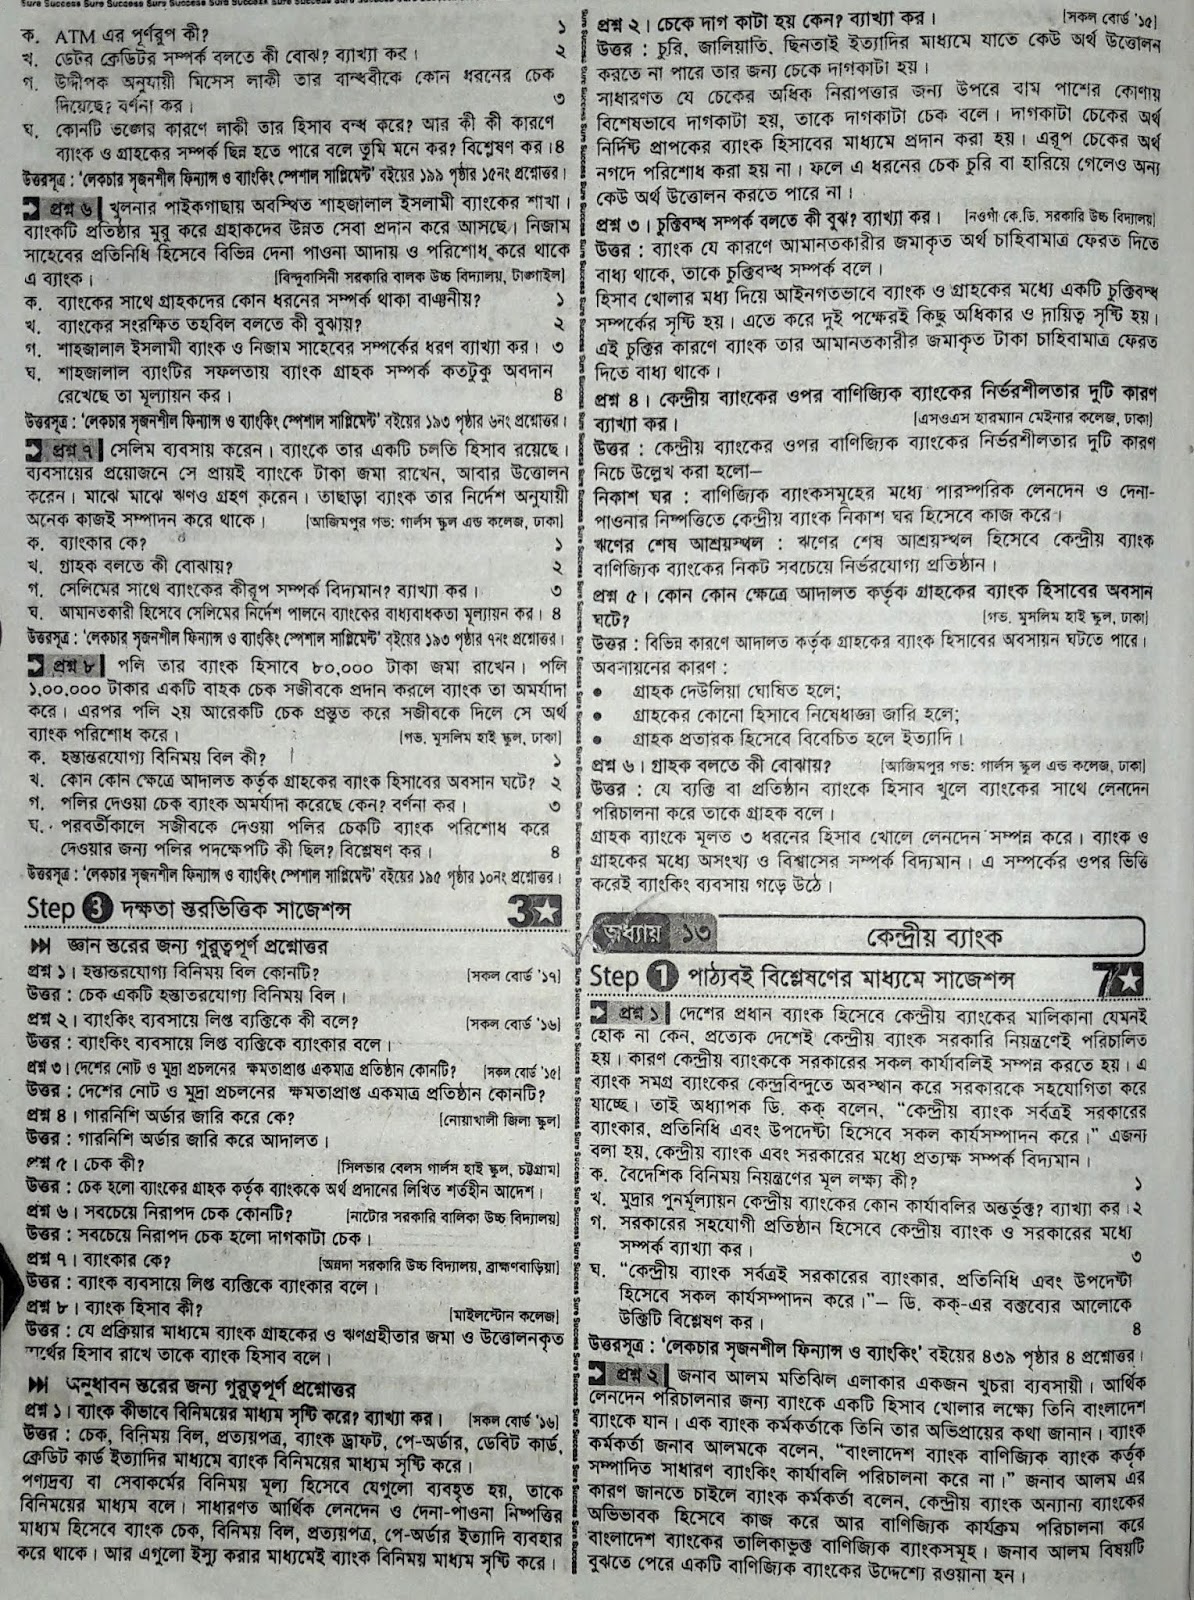 SSC Finance and Banking suggestion, question paper, model question, mcq question, question pattern, syllabus for dhaka board, all boards